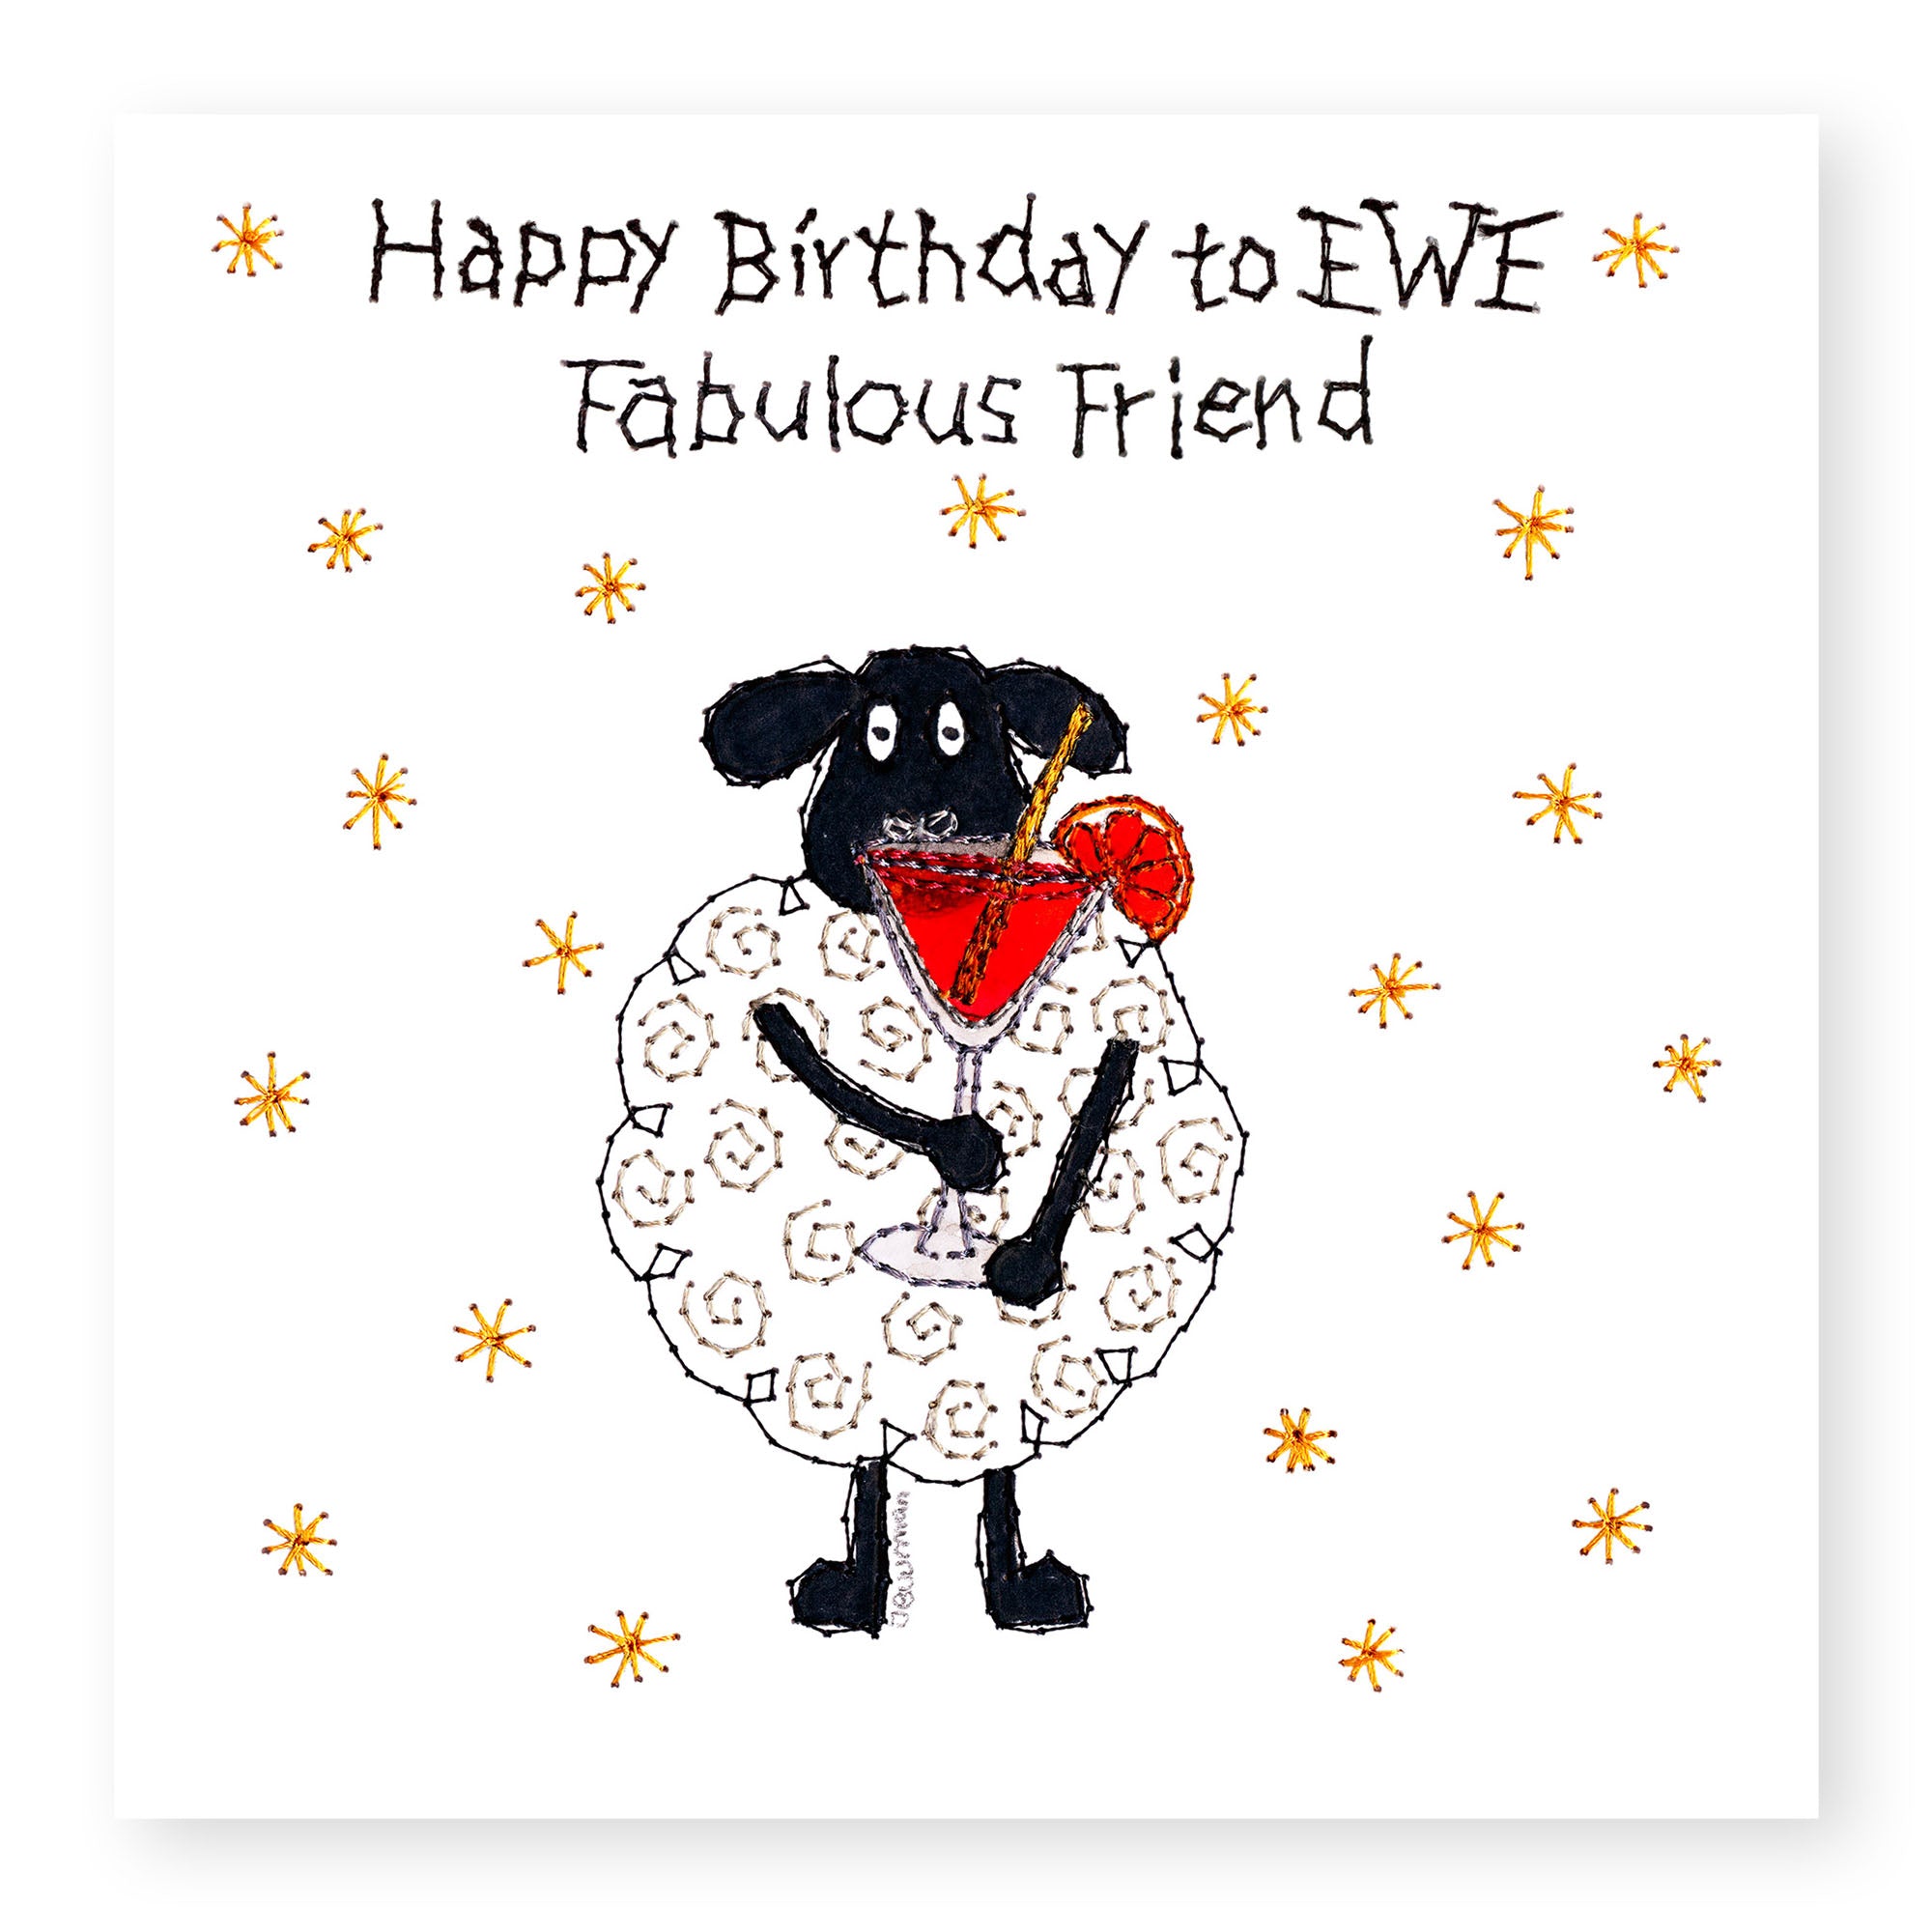 Ewe Fabulous Friend Brithday Card from Penny Black